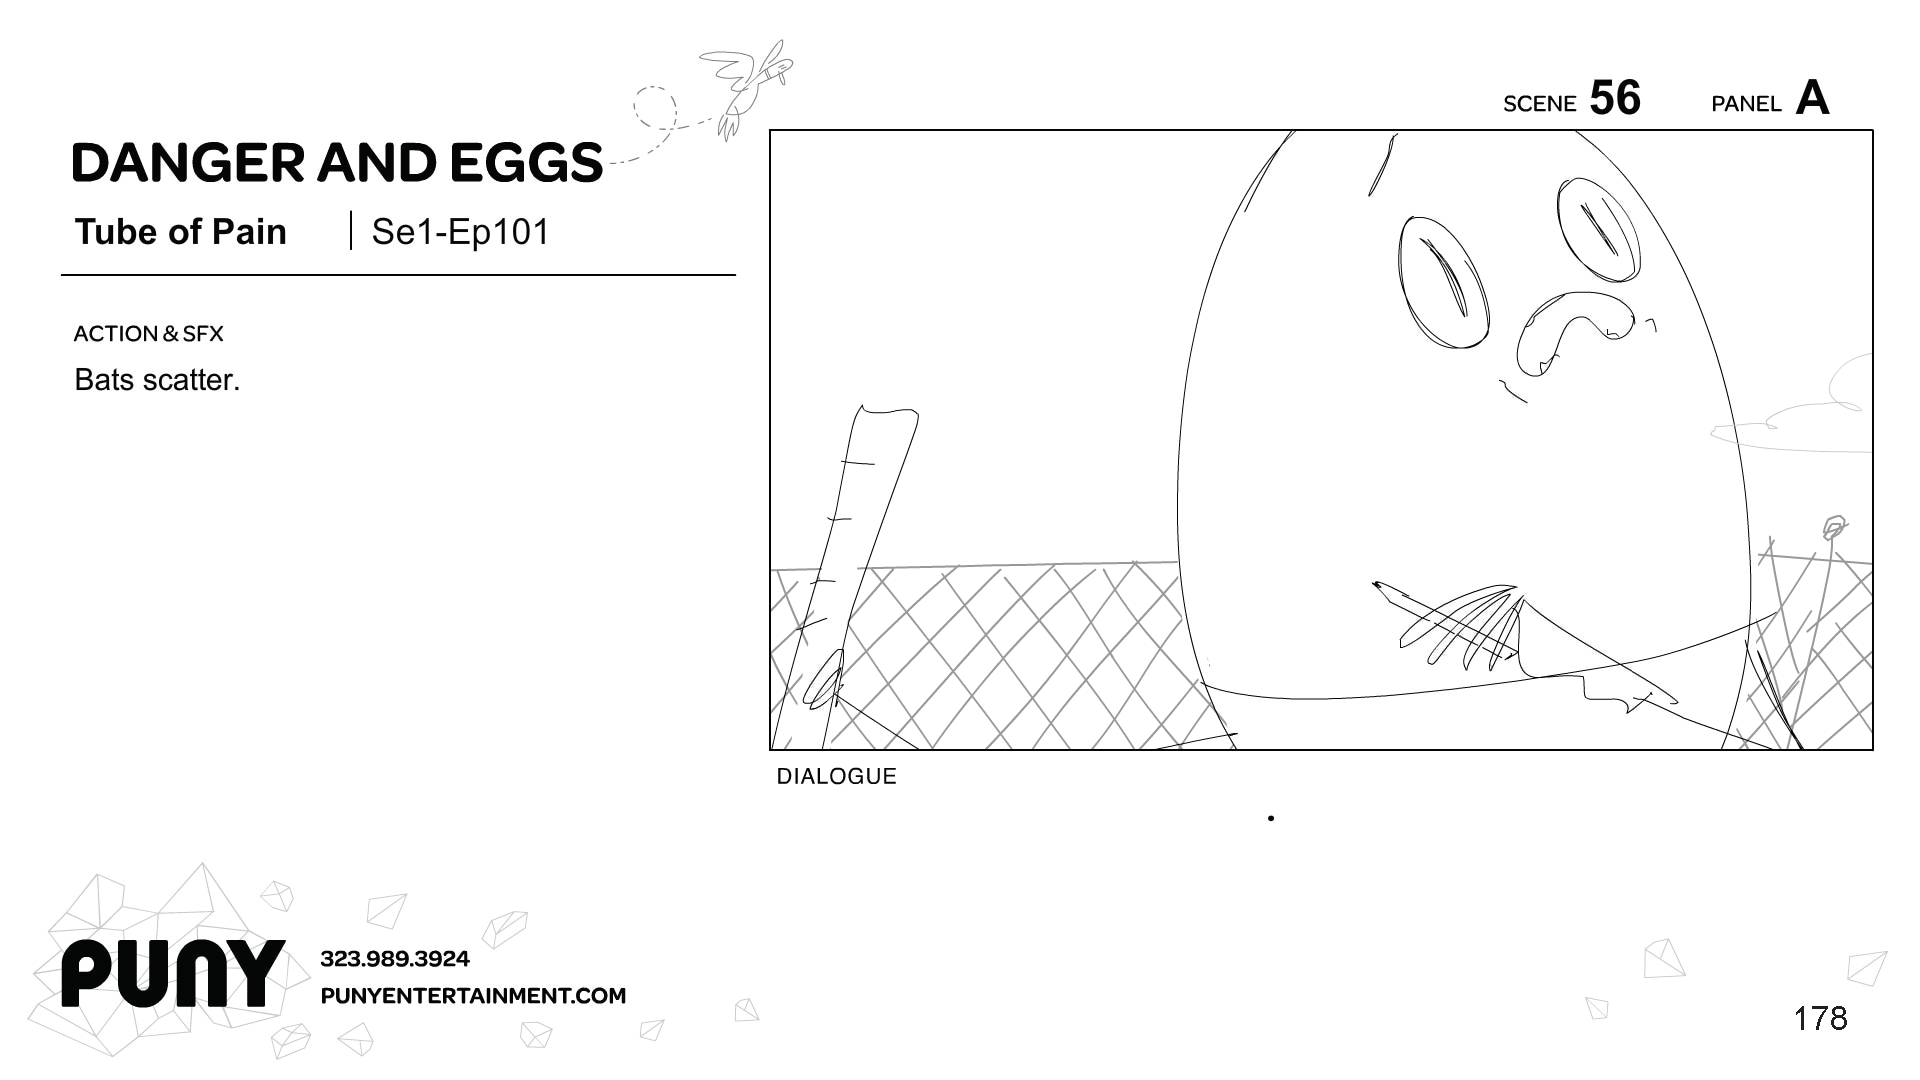 MikeOwens_STORYBOARDS_DangerAndEggs_Page_178.png